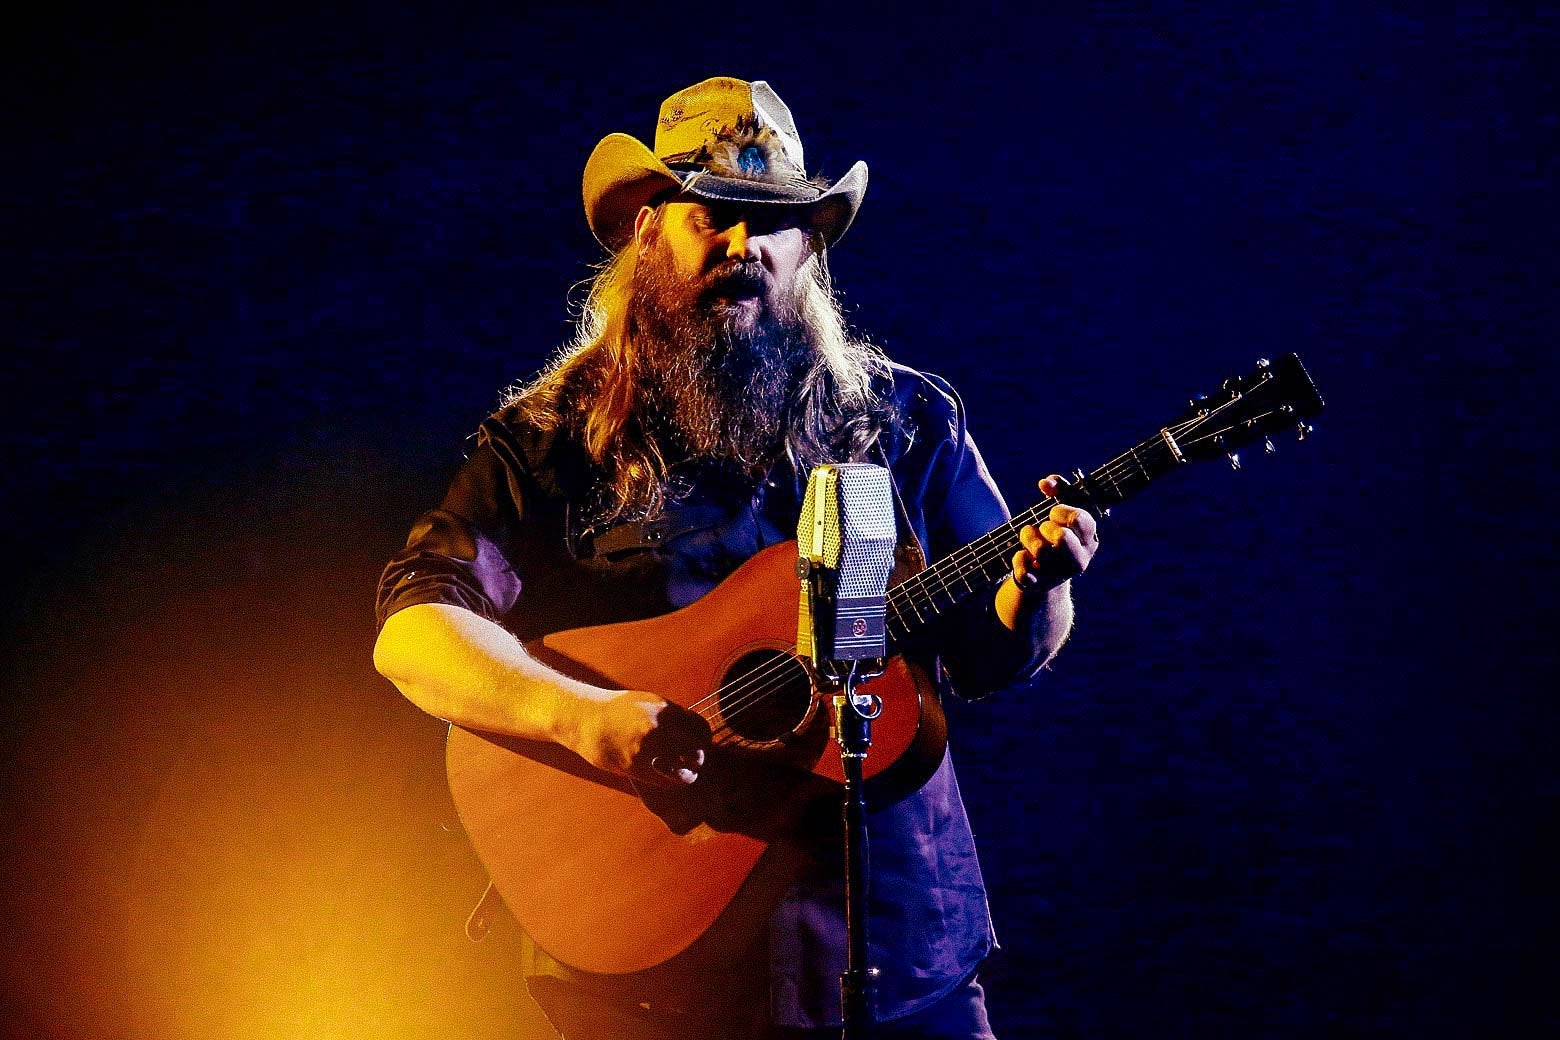 Chris Stapleton holding a guitar and singing into a microphone.